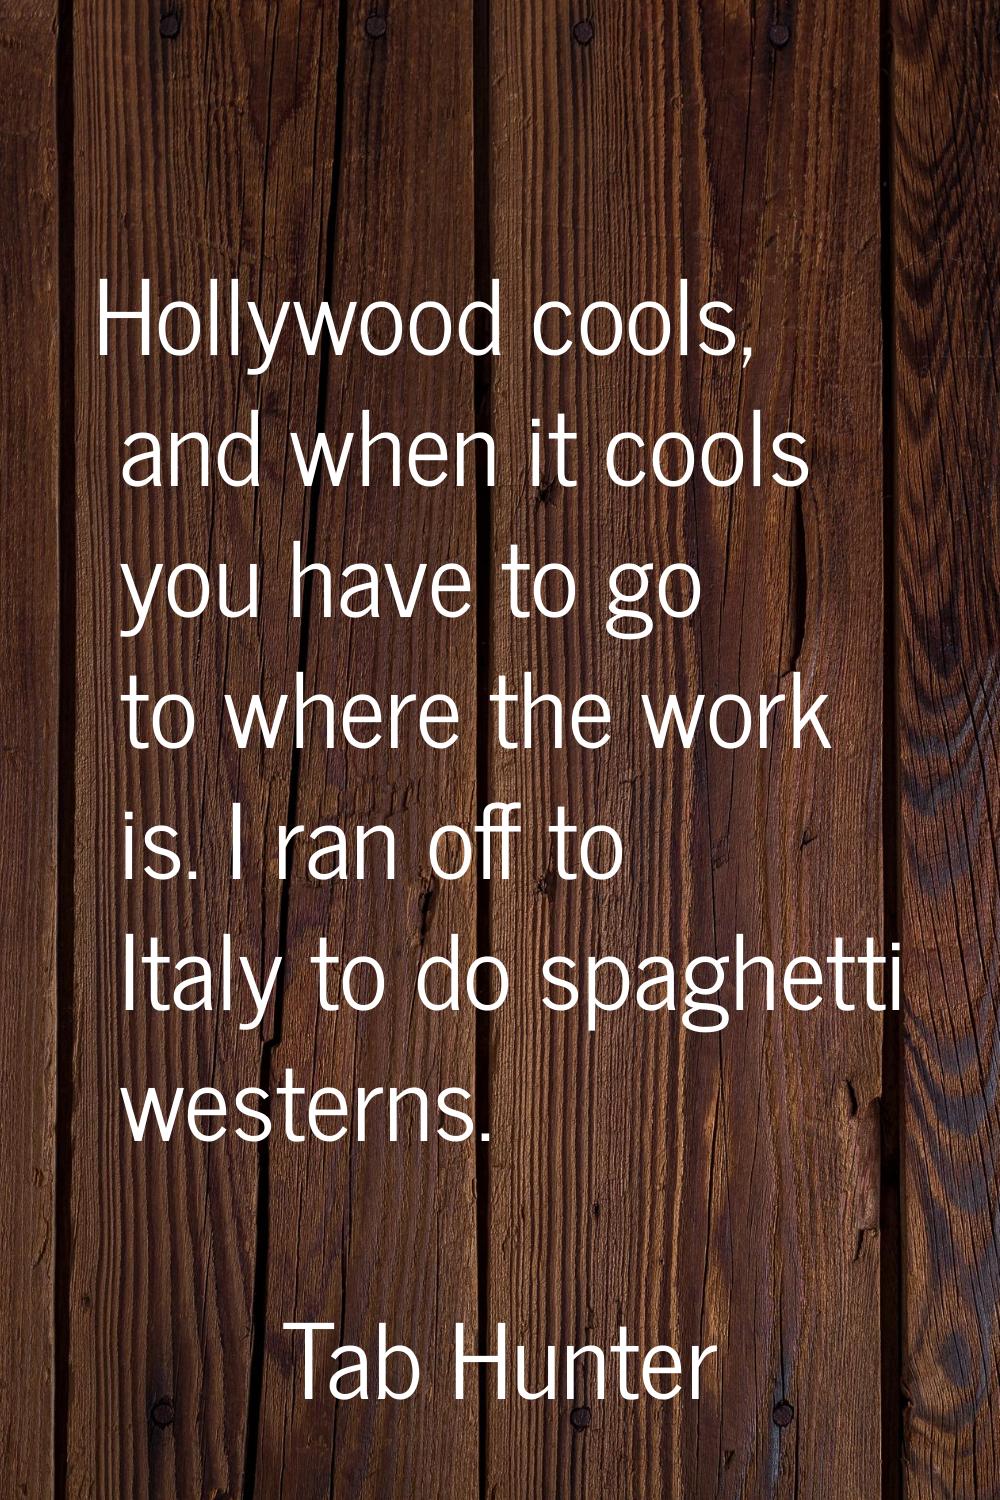 Hollywood cools, and when it cools you have to go to where the work is. I ran off to Italy to do sp